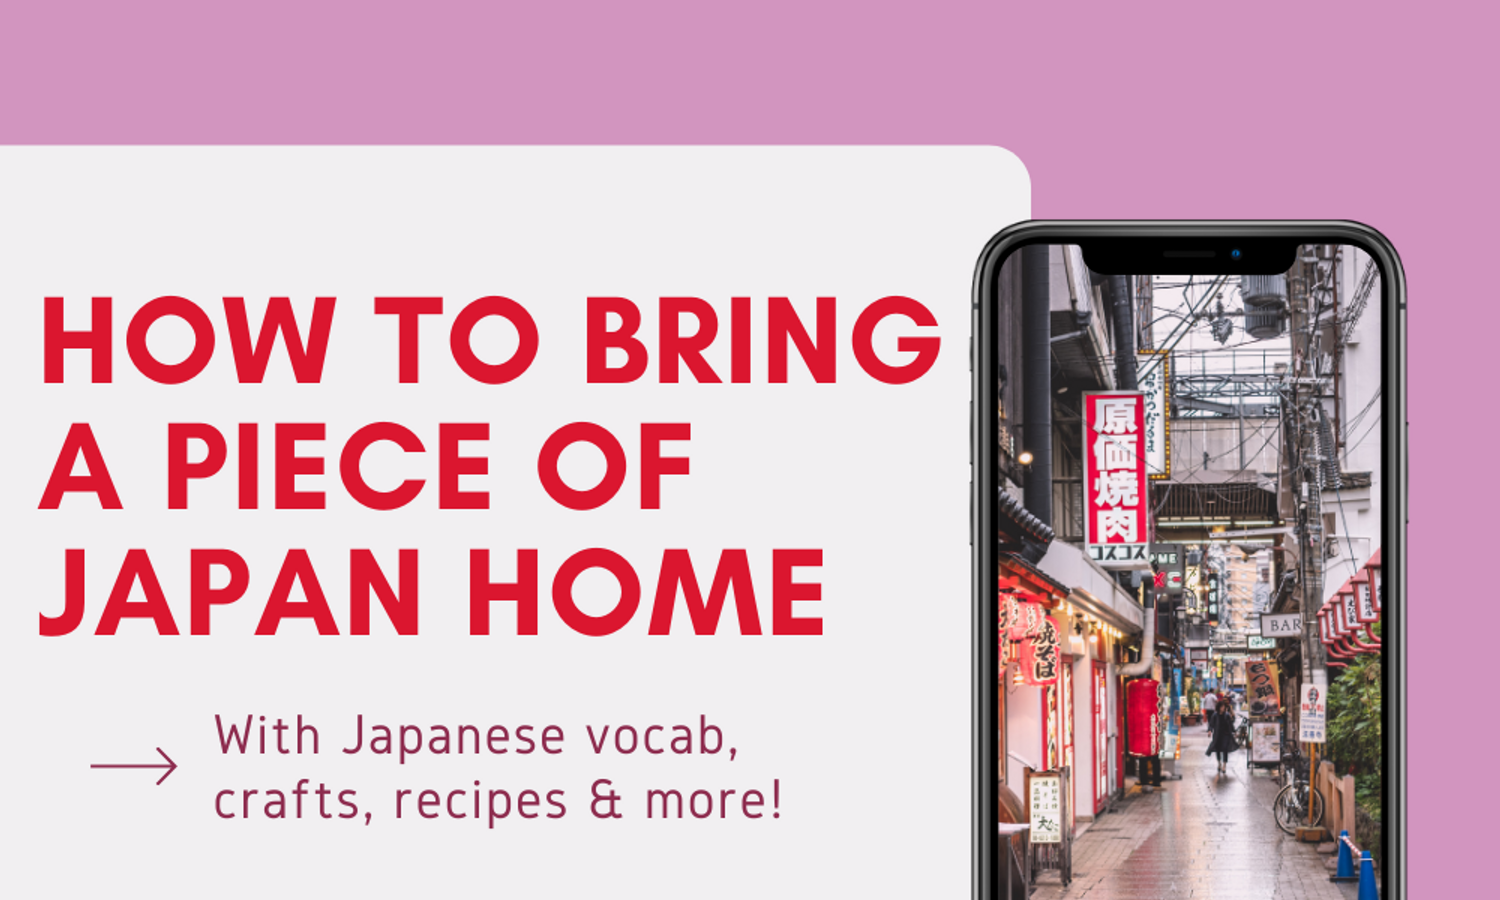 How to Bring a Piece of Japan Home